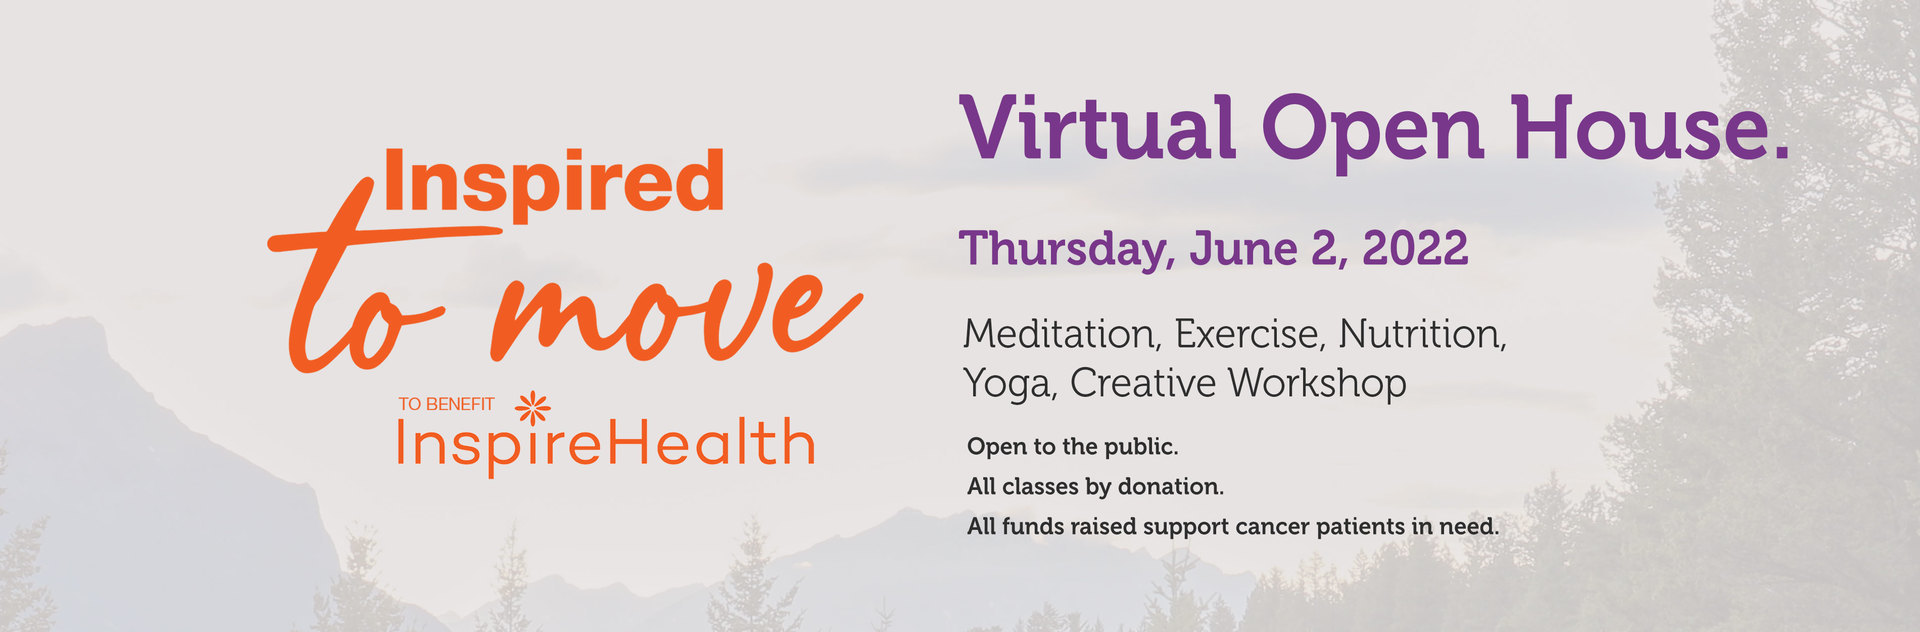 InspireHealth's Inspired to Move Virtual Fundraiser, Online Event